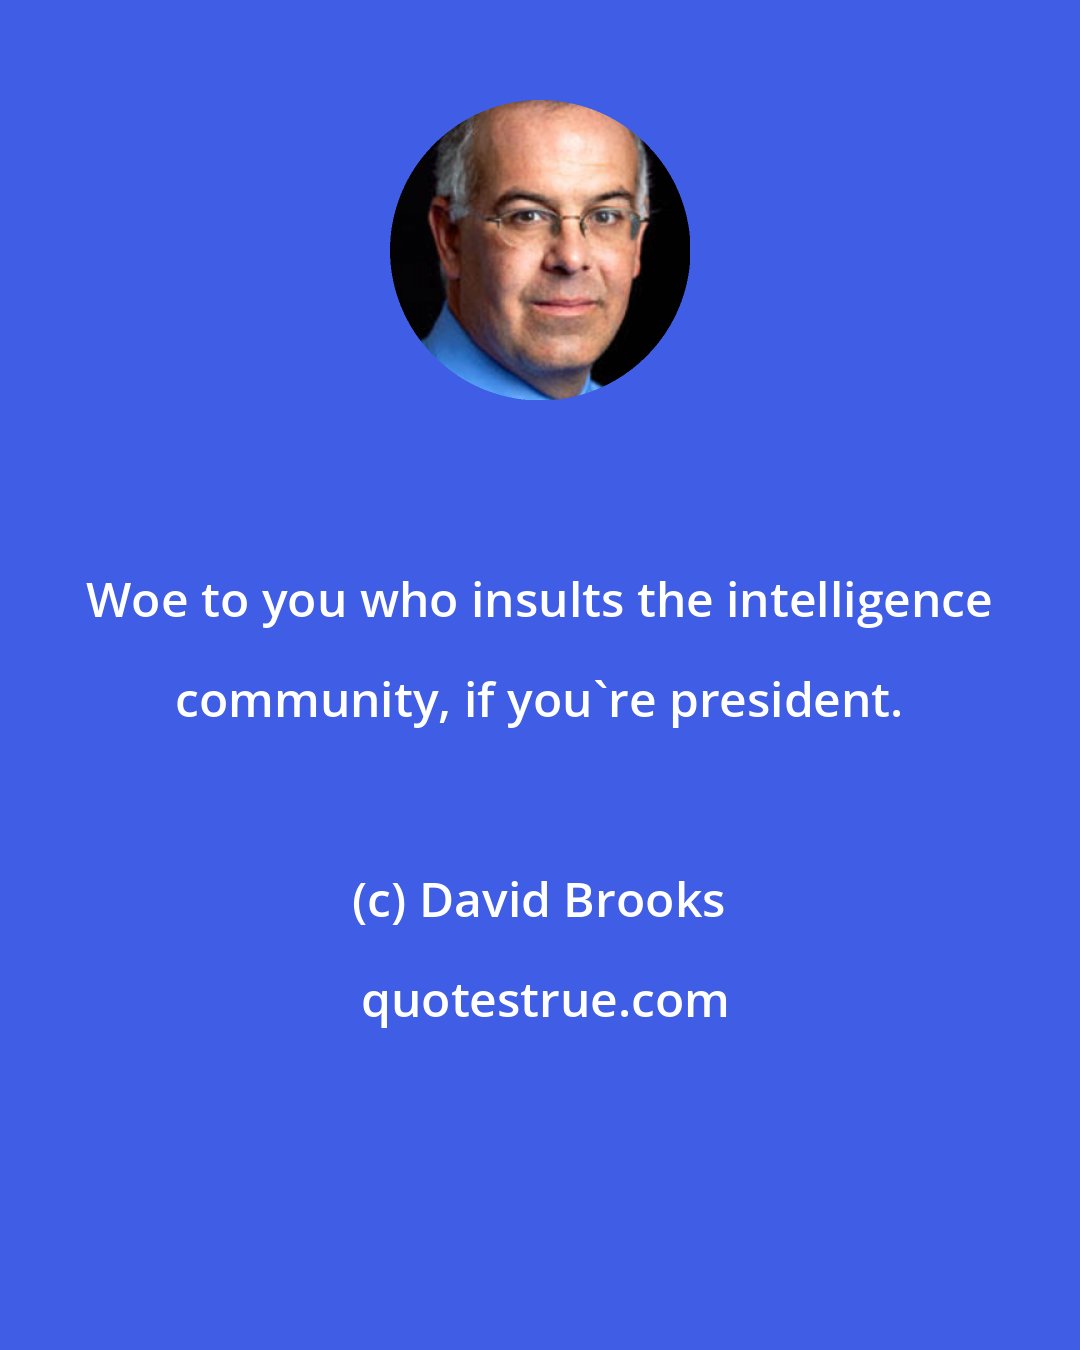 David Brooks: Woe to you who insults the intelligence community, if you're president.